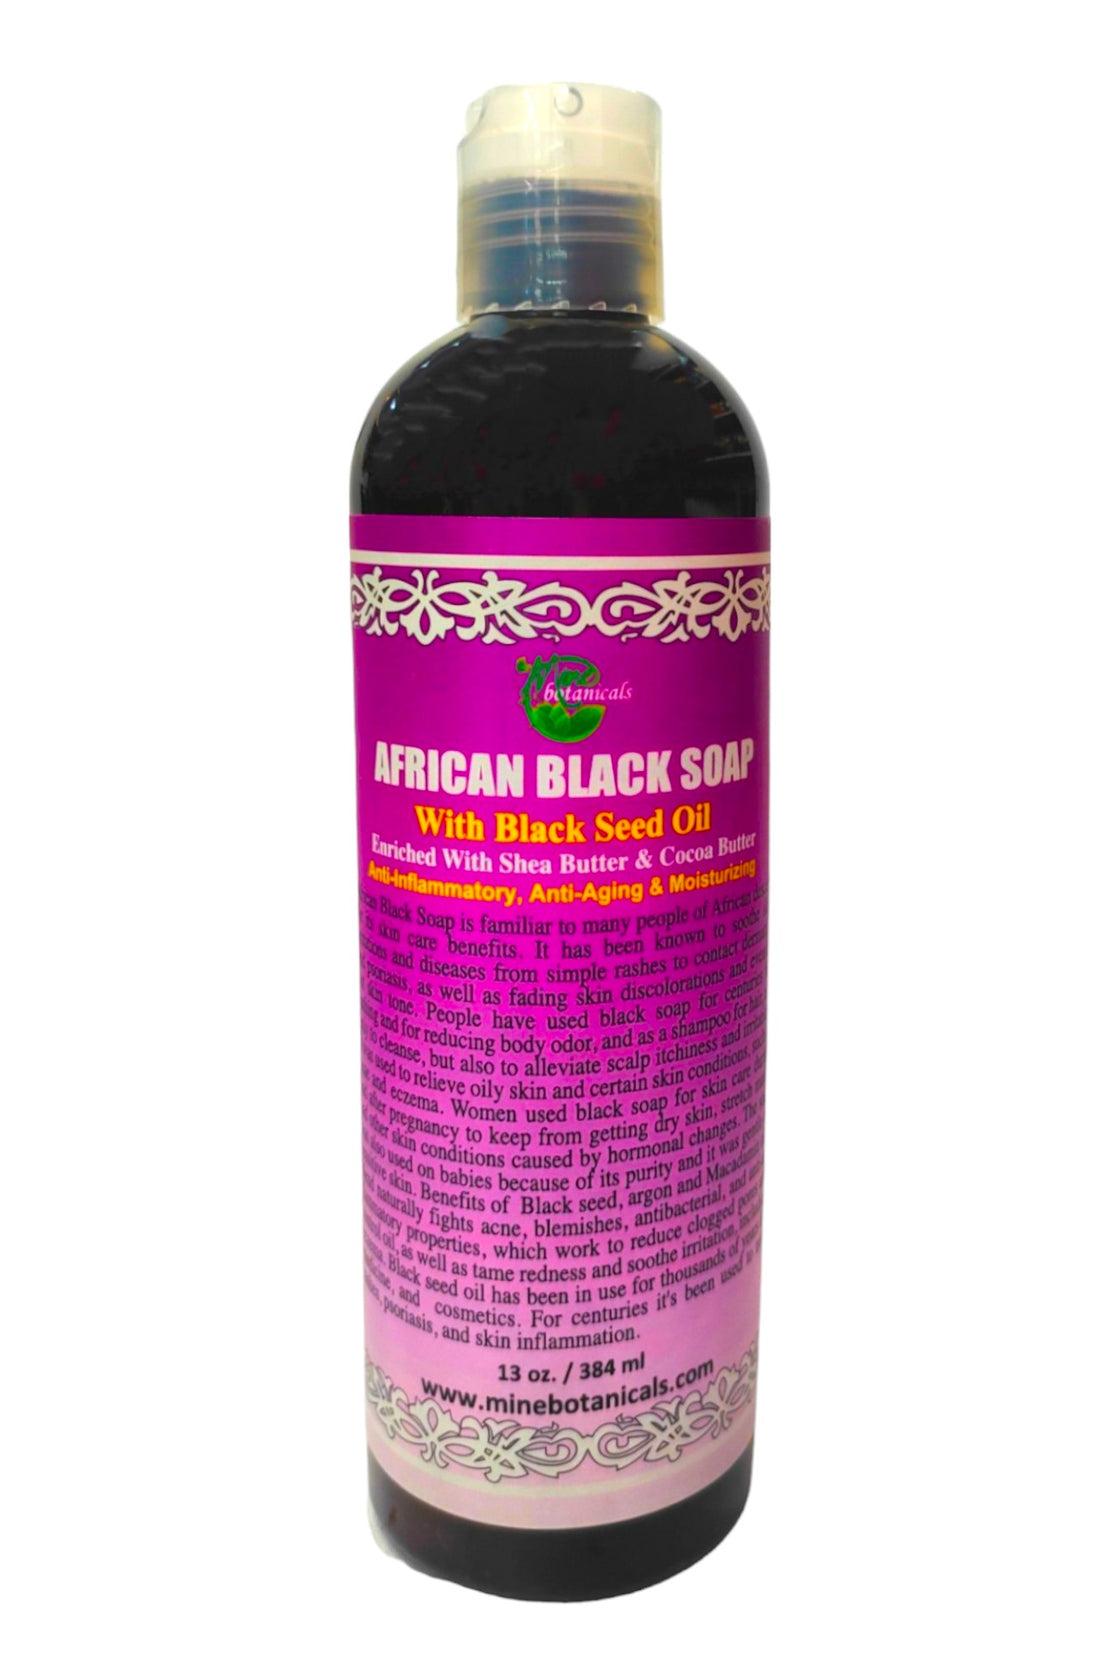 African Black Soap With Black seed Oil